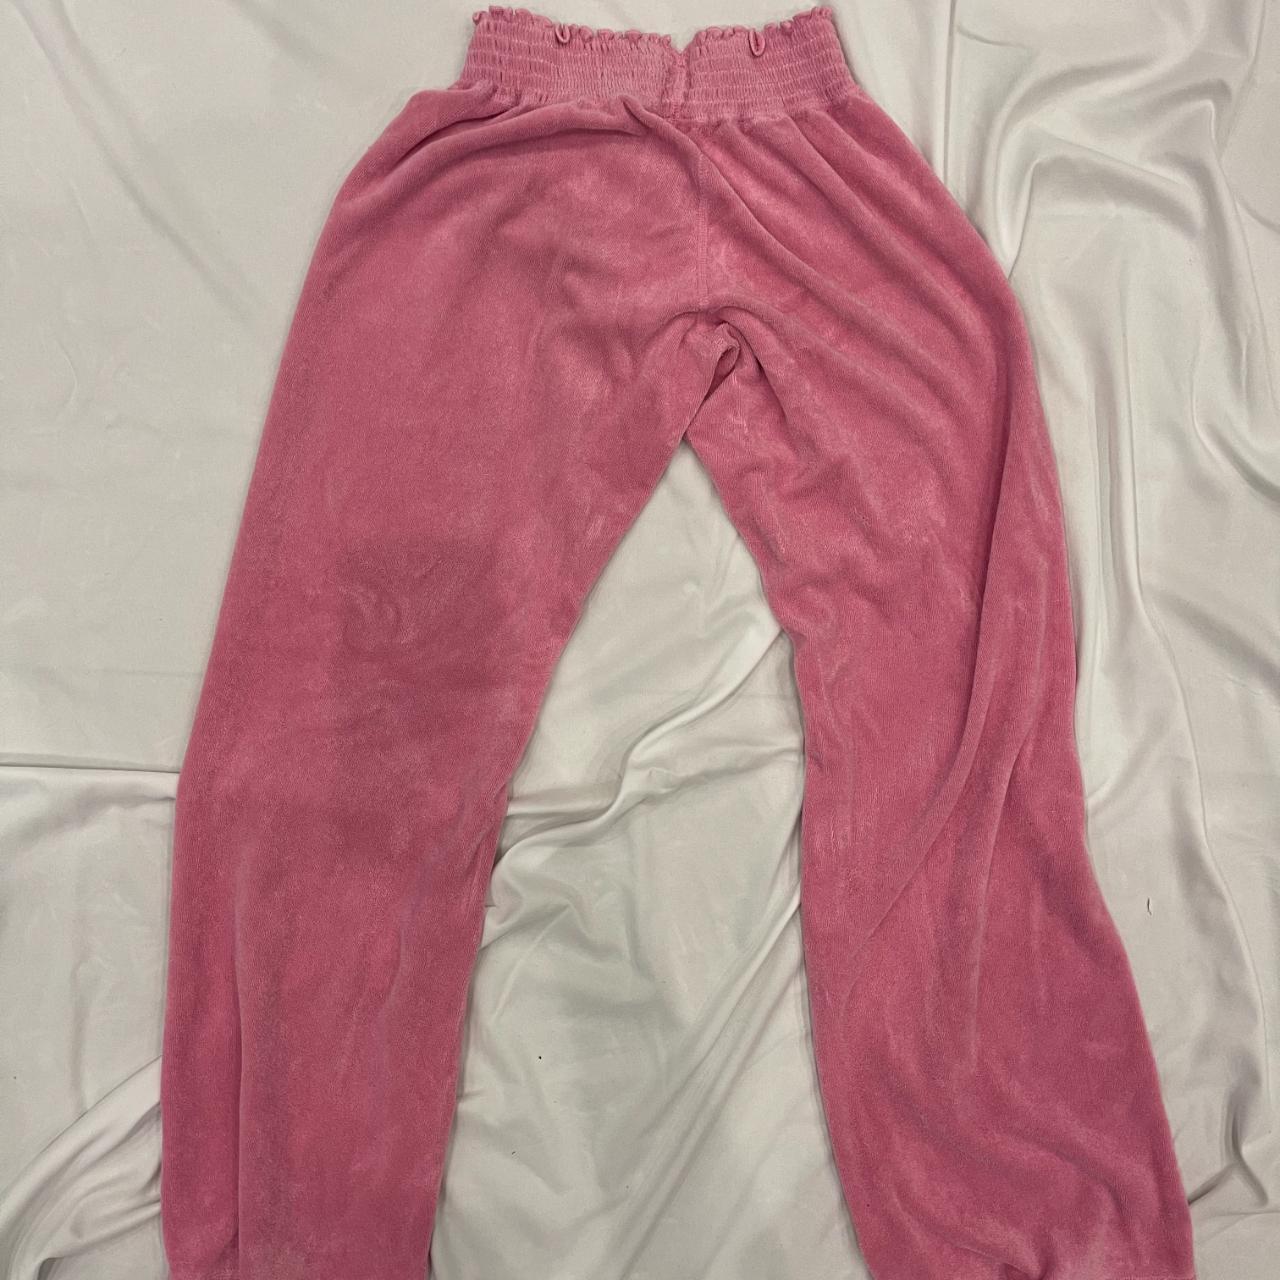 2000s Juicy Couture Pink Sweatpants